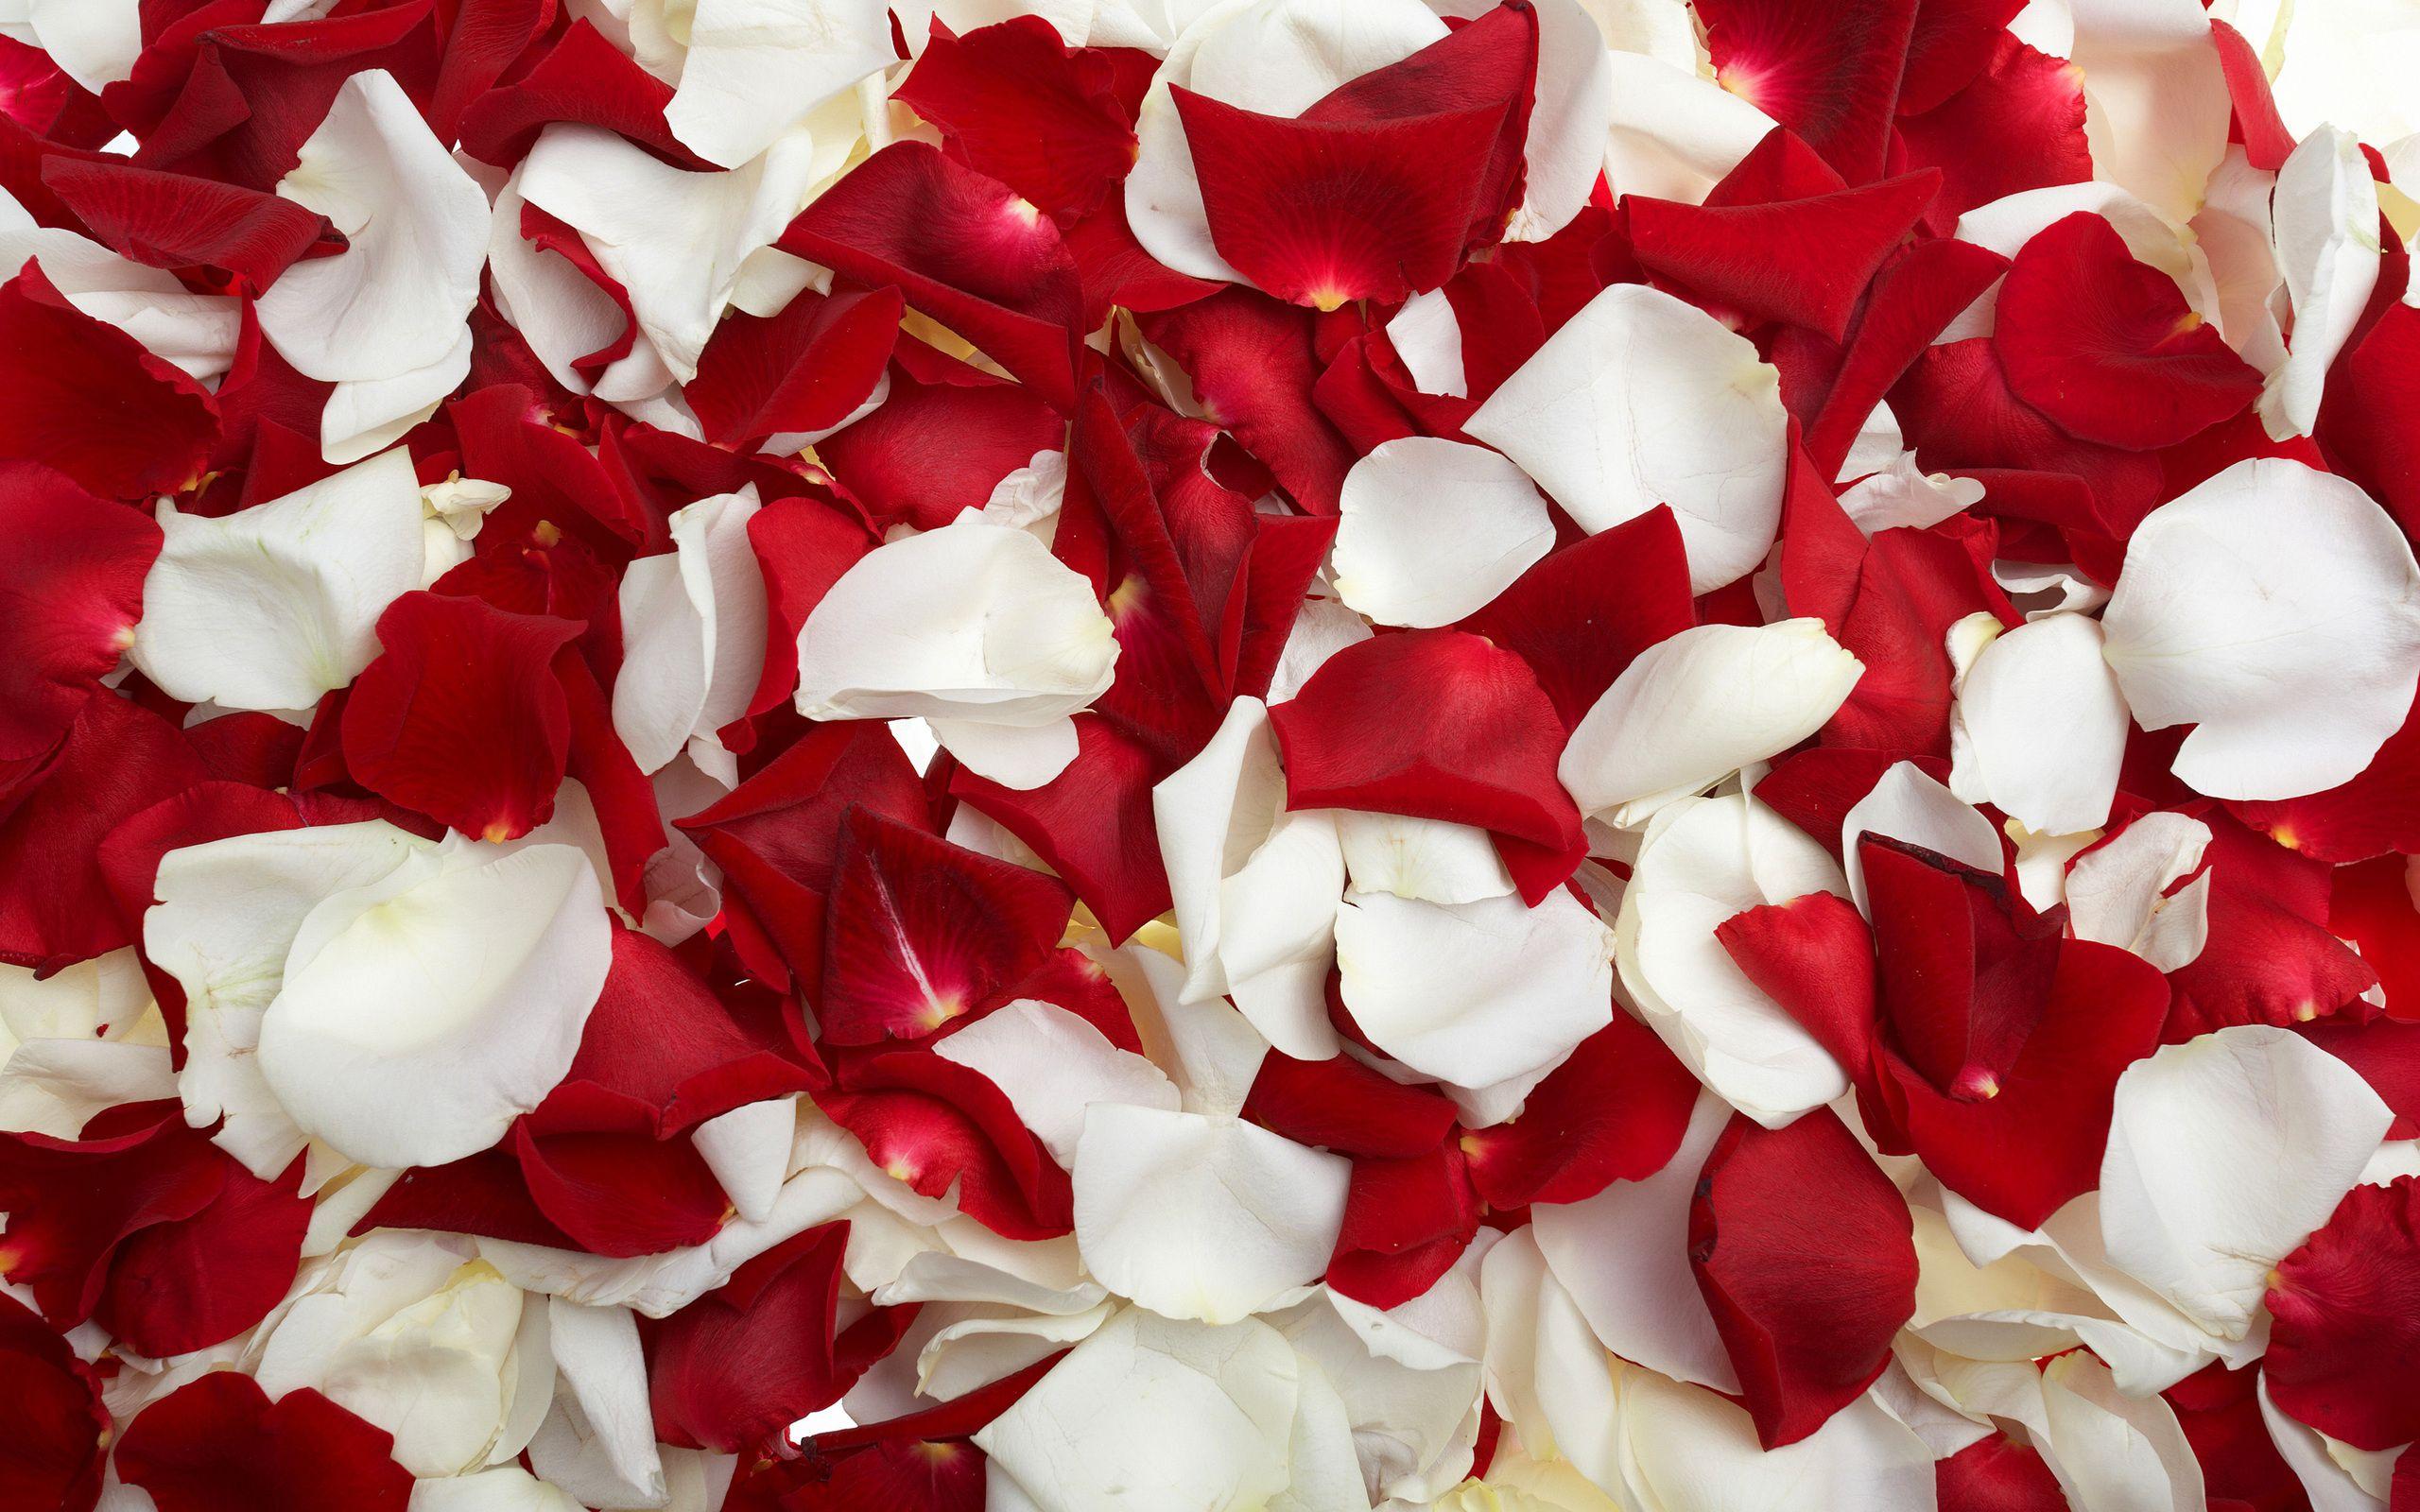 Red and White Roses, High Definition, High Quality